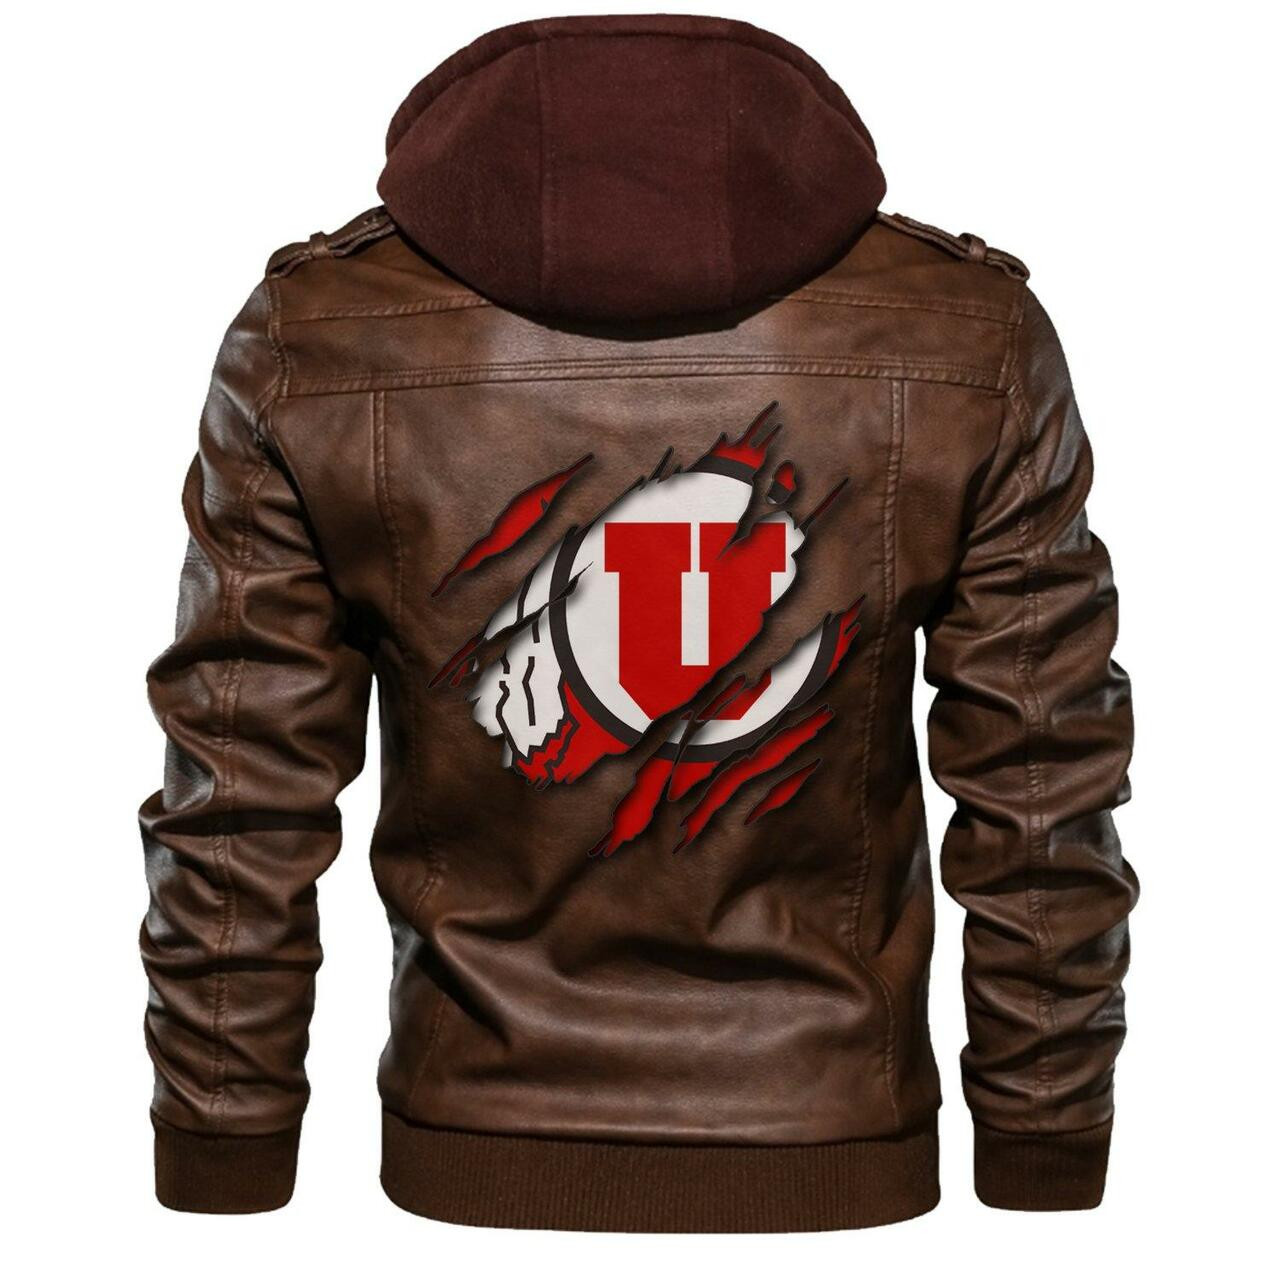 This leather Jacket will look great on you and make you stand out from the crowd 203